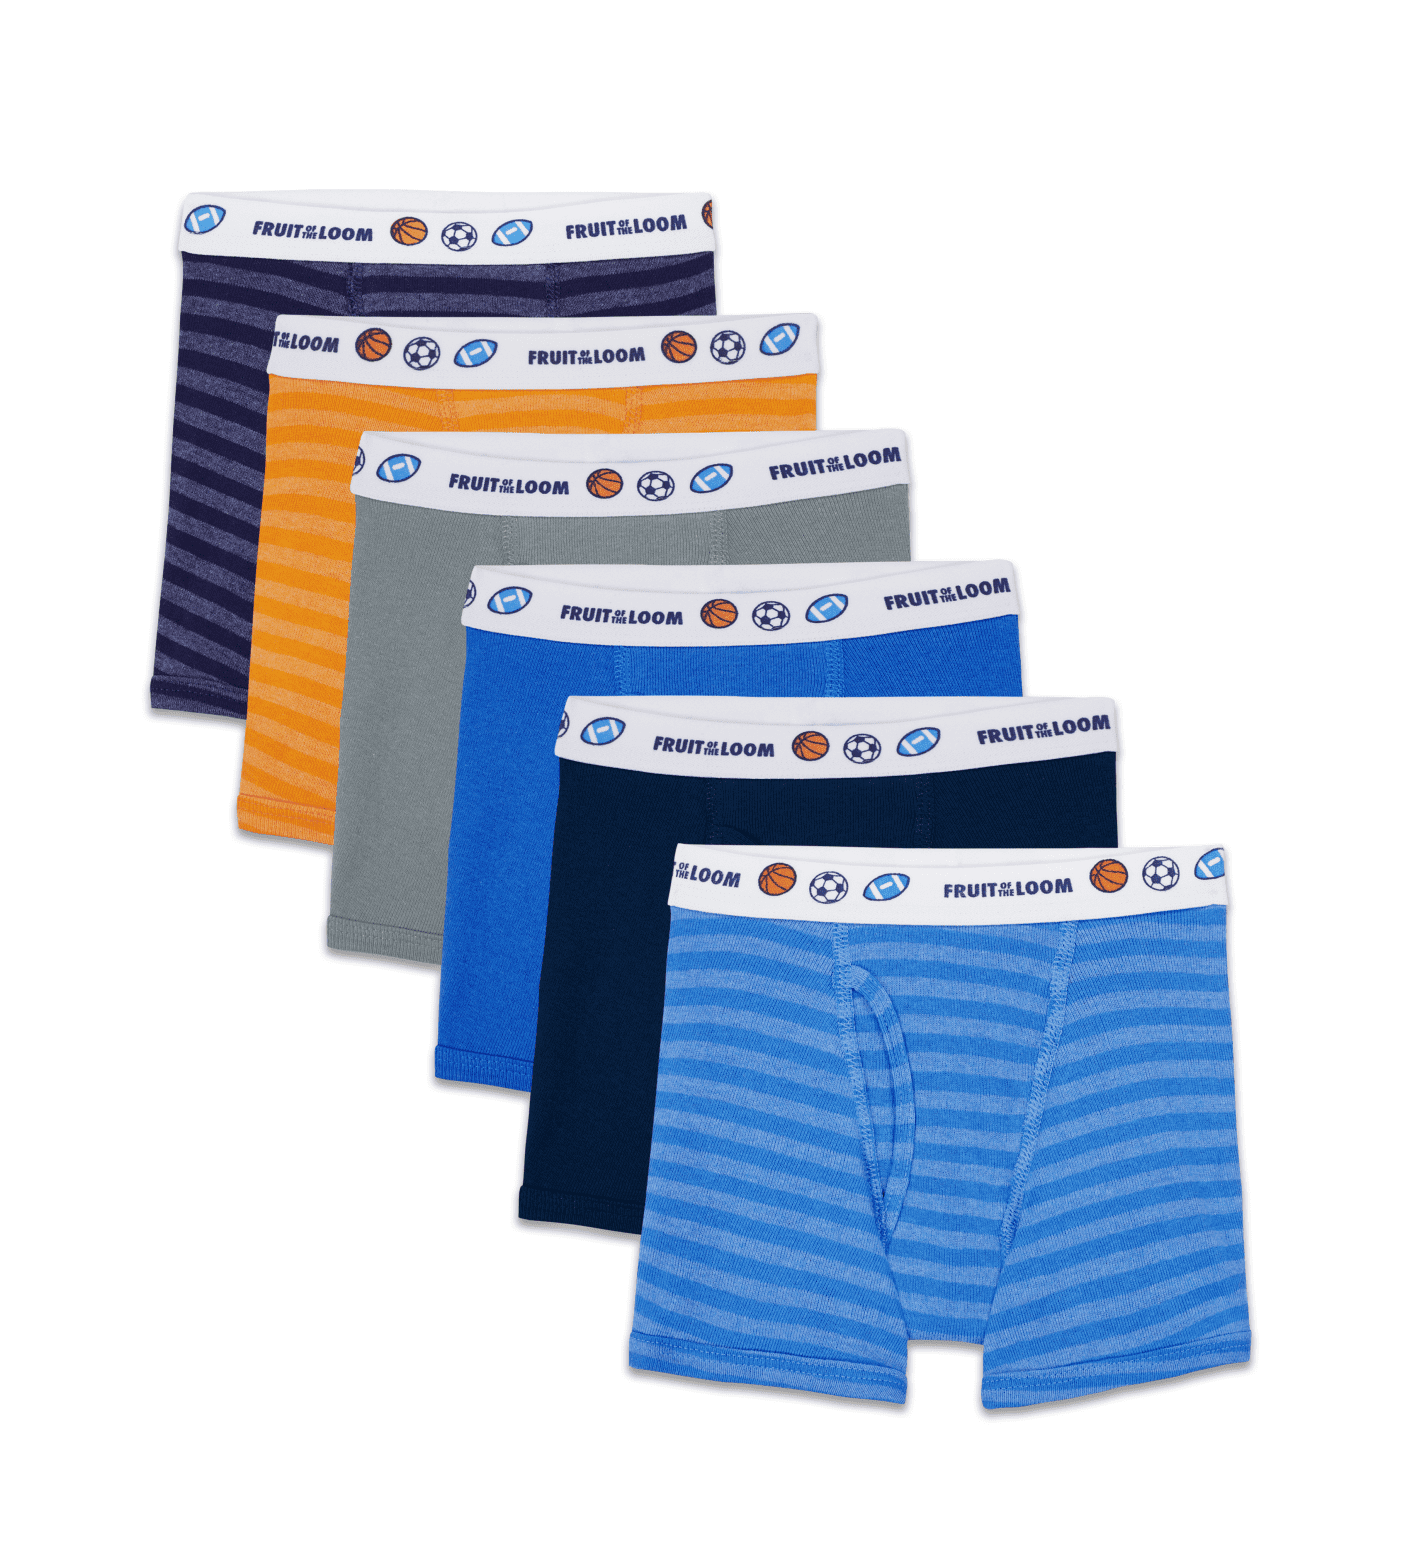 Toddler Boys' Eversoft® Boxer Briefs, Assorted 6 Pack